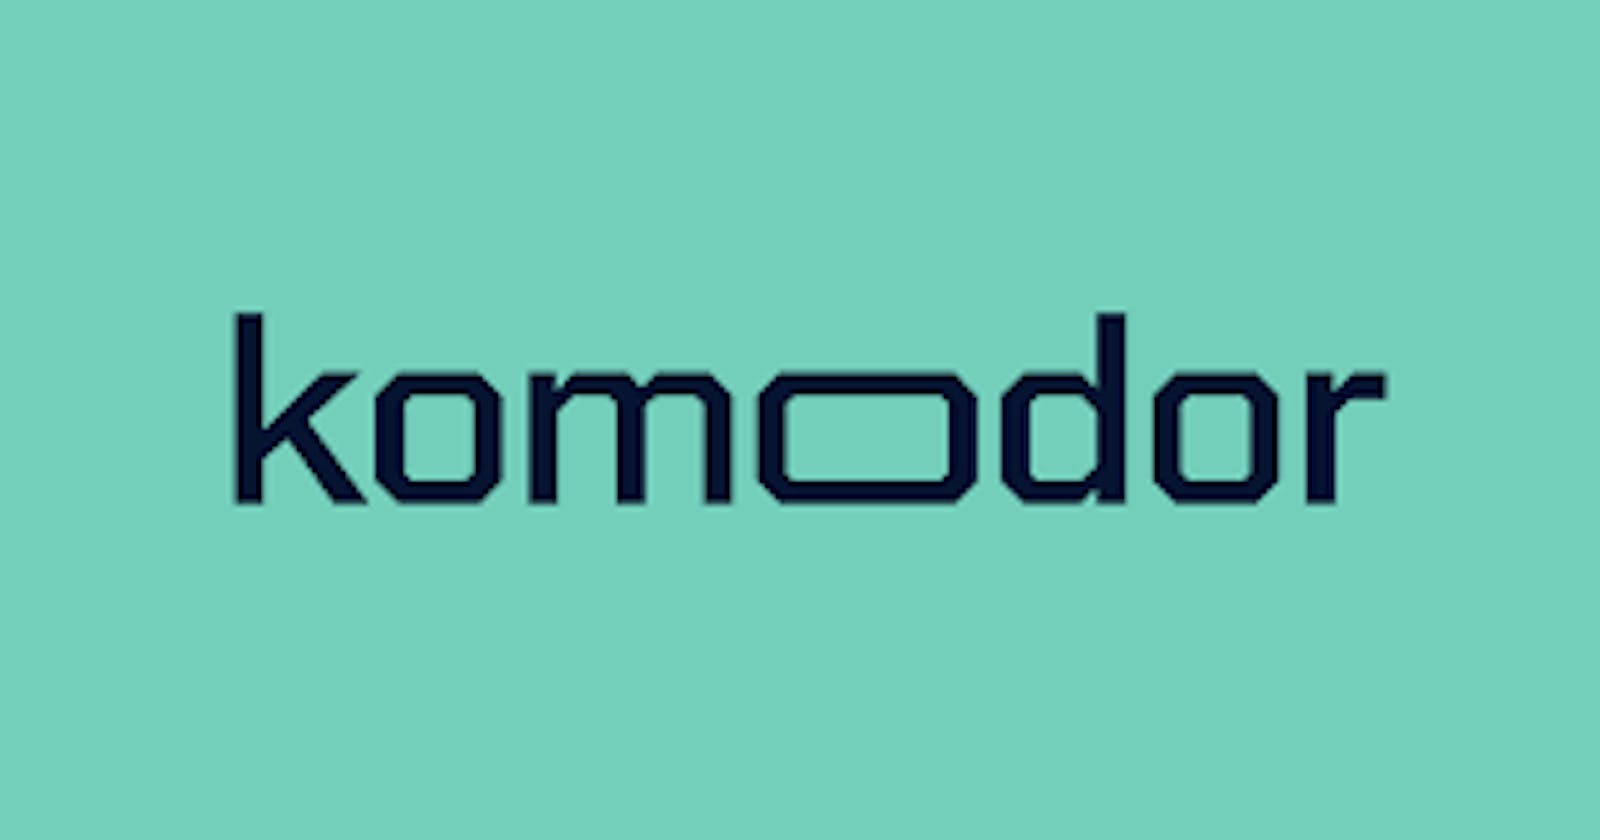 Simplify and streamline troubleshooting your kubernetes cluster with Komodor